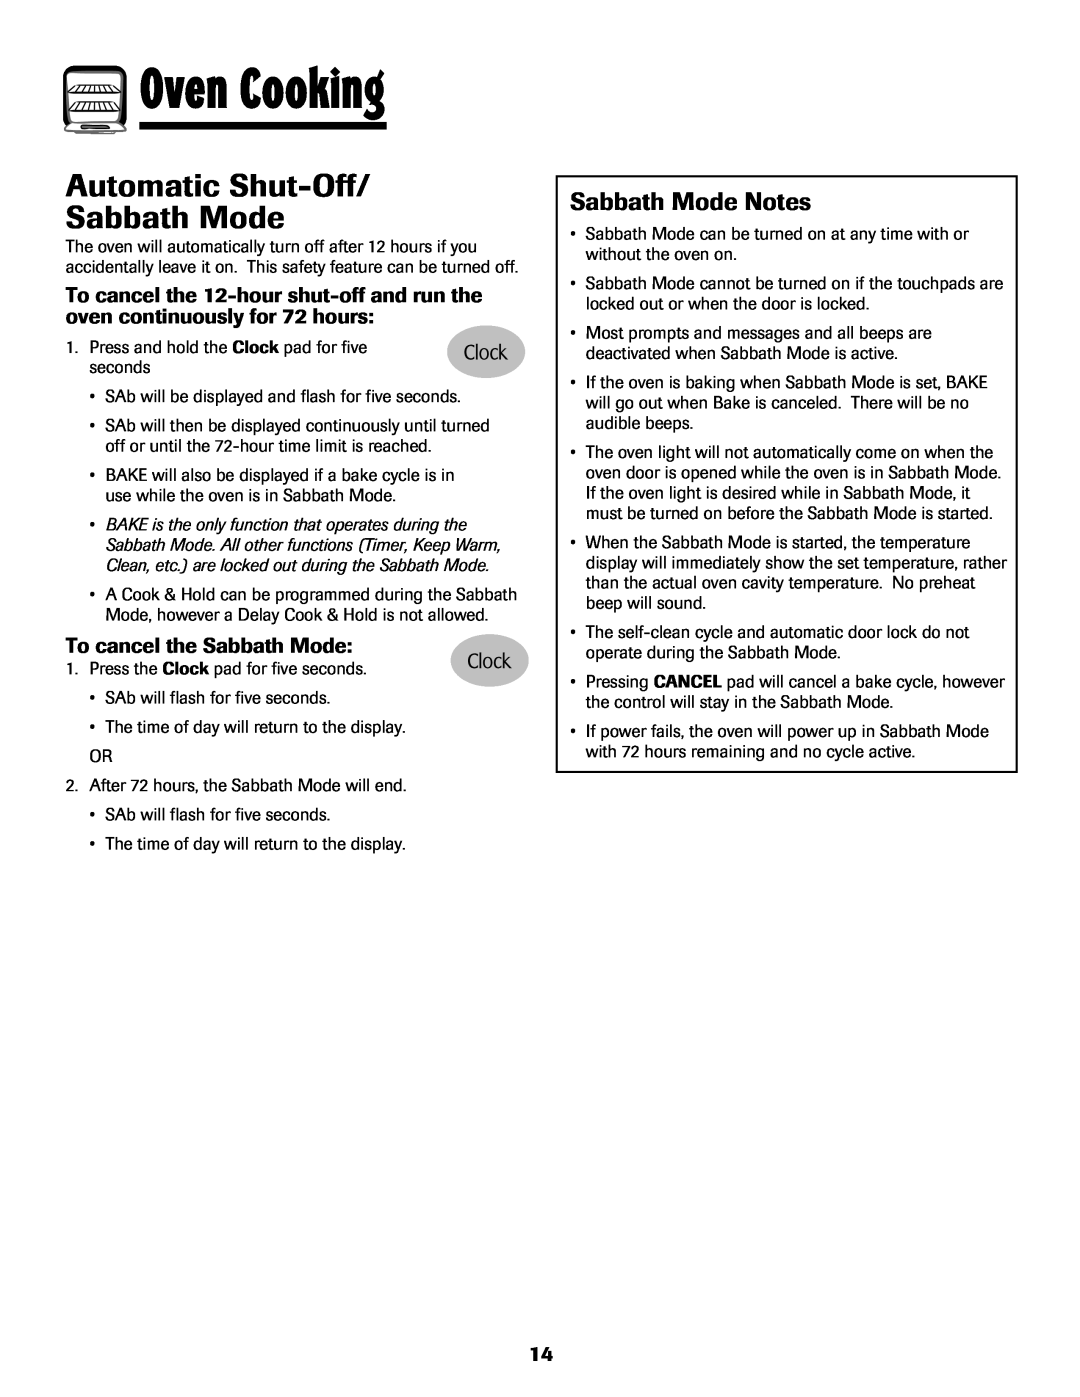 Maytag MGS5875BDW Automatic Shut-Off Sabbath Mode, Sabbath Mode Notes, To cancel the Sabbath Mode, Oven Cooking 